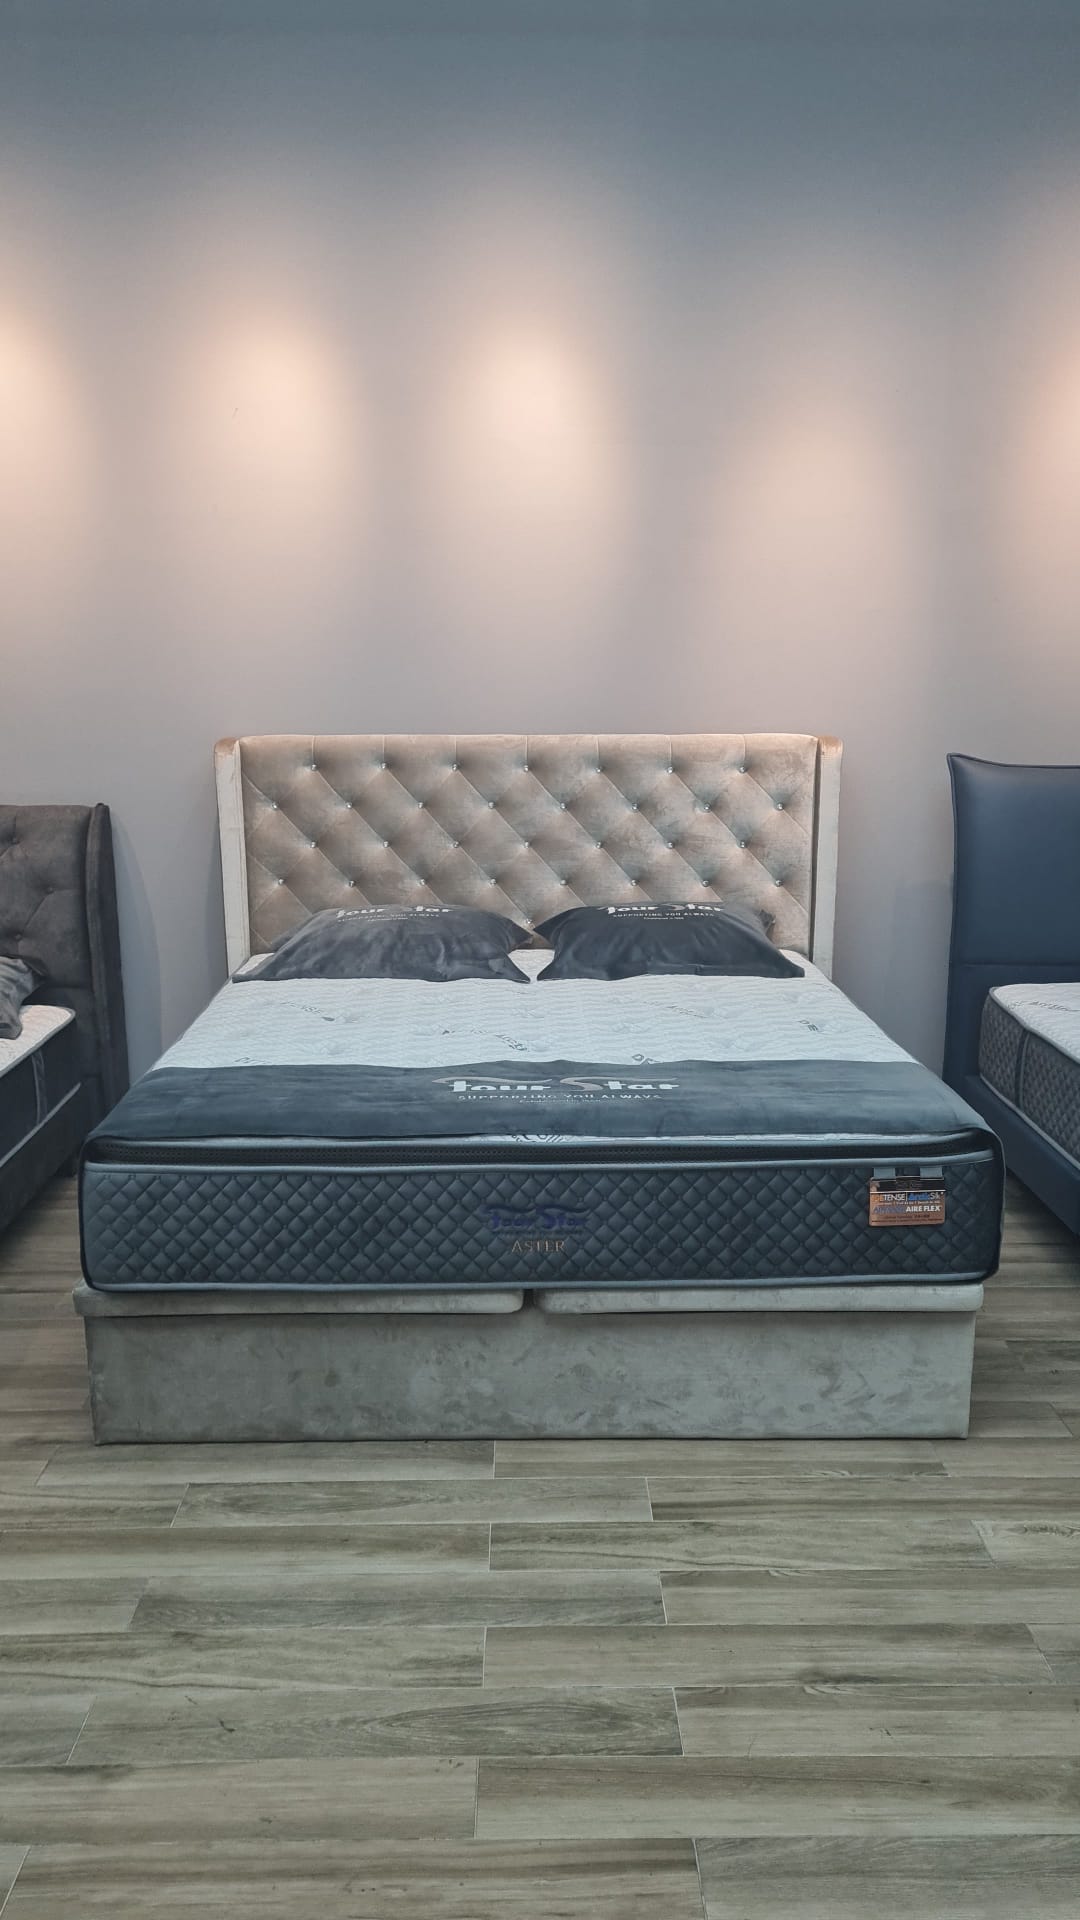 Lobang: Furniture Store Offering $88 Storage Beds When You Purchase A Mattress from 1 - 12 Mar 23 - 5